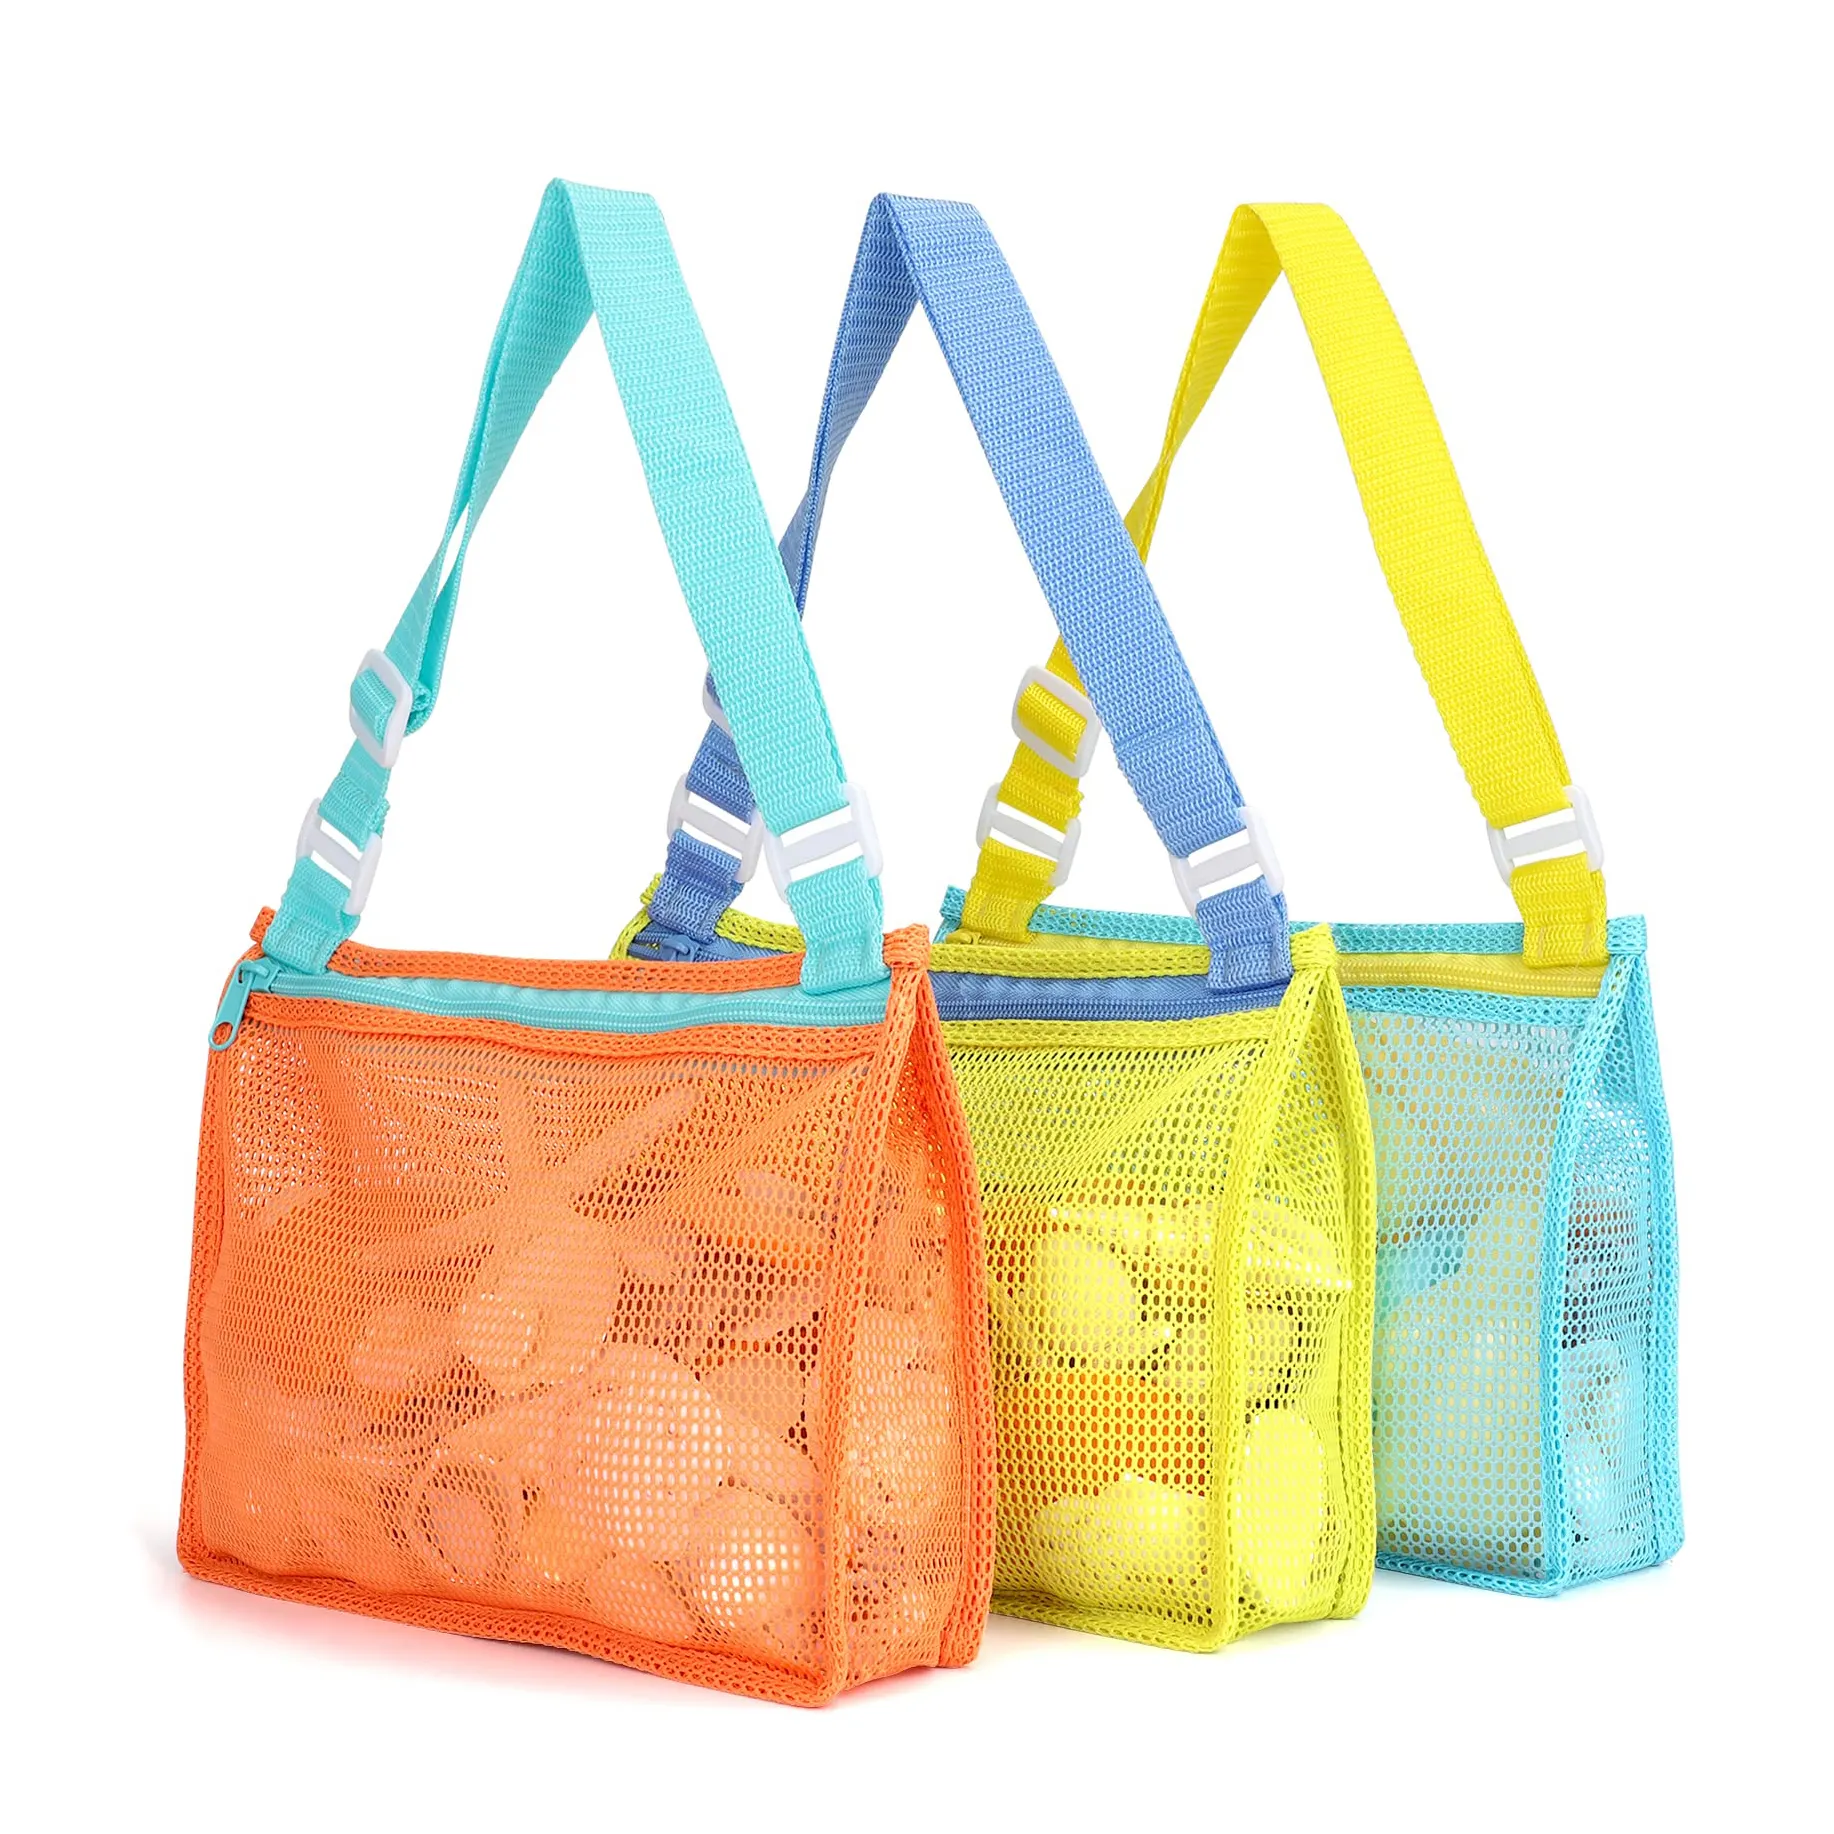 Beach Toys Children Grocery Seashell Shell Collecting Mesh Beach Bag handbag and purse for Boys and Girls with zipper